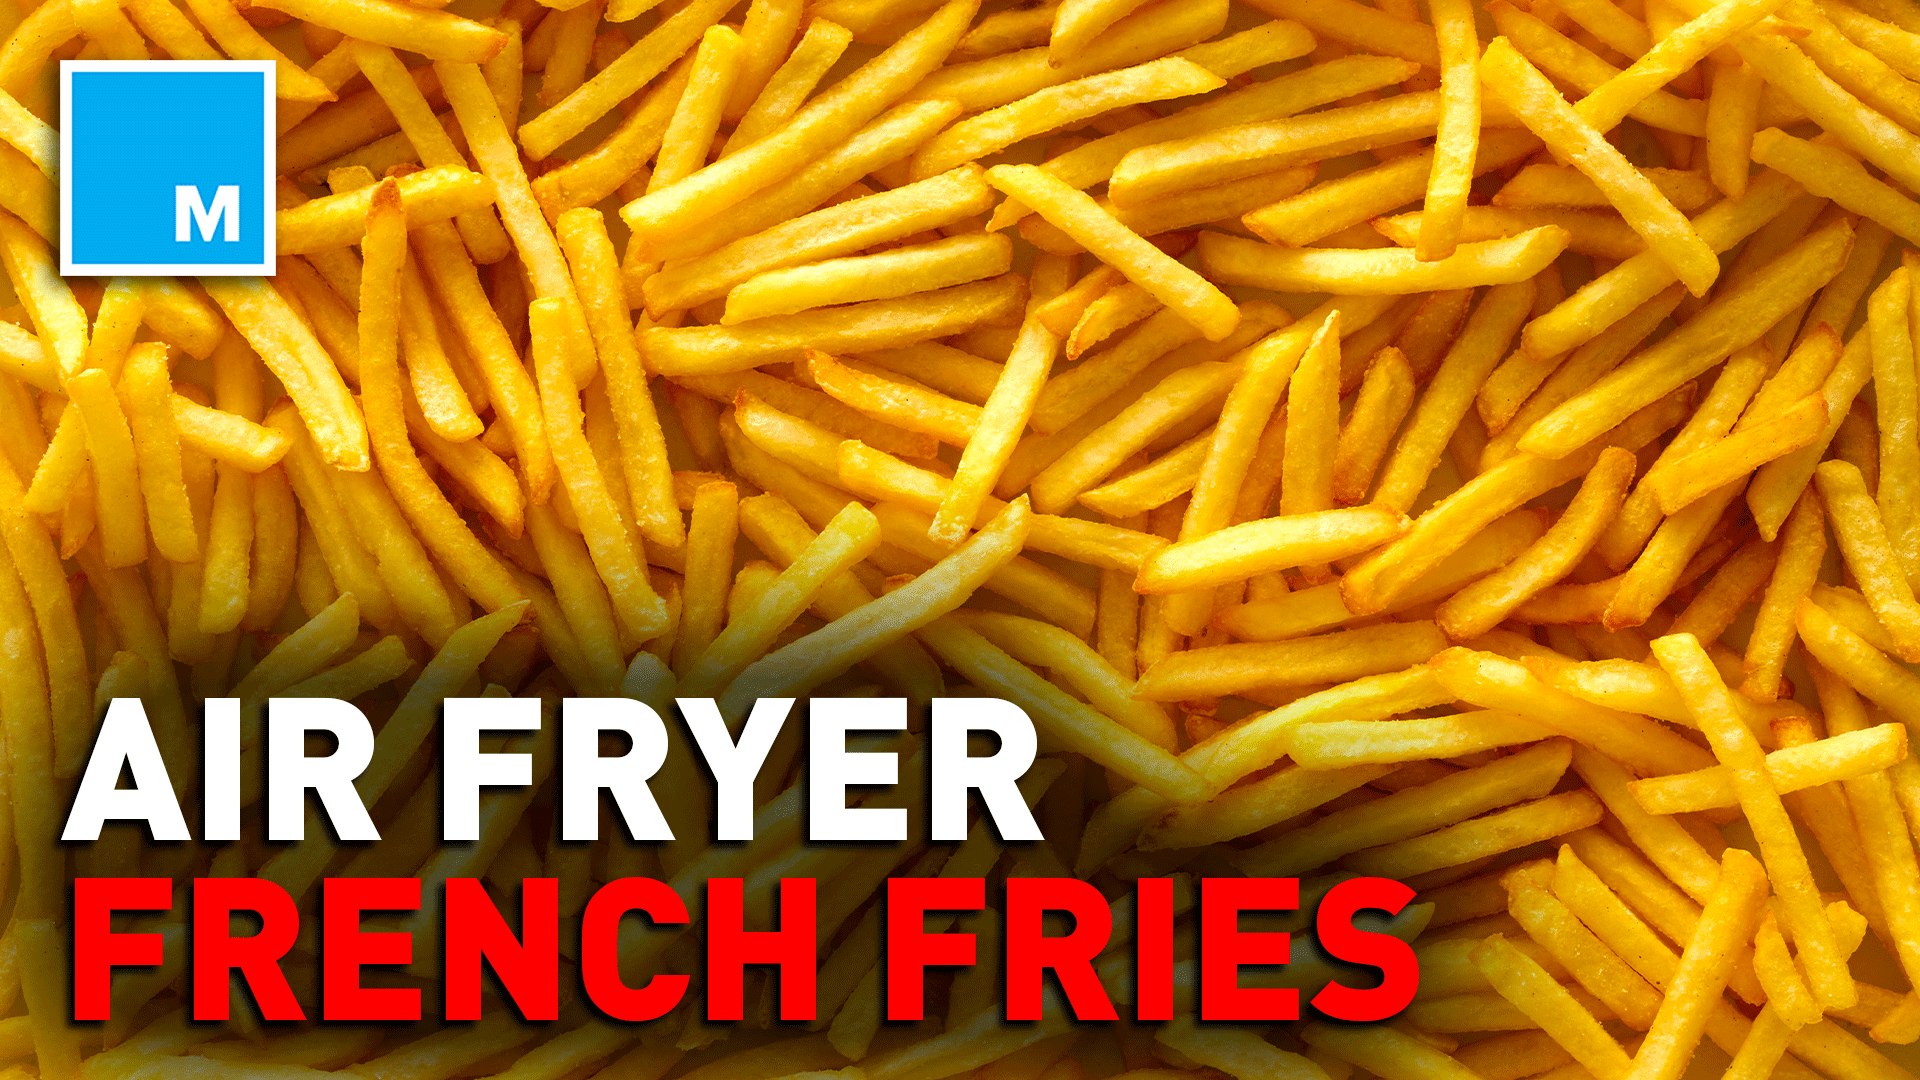 National French Fry Day 2019 - HD Wallpaper 